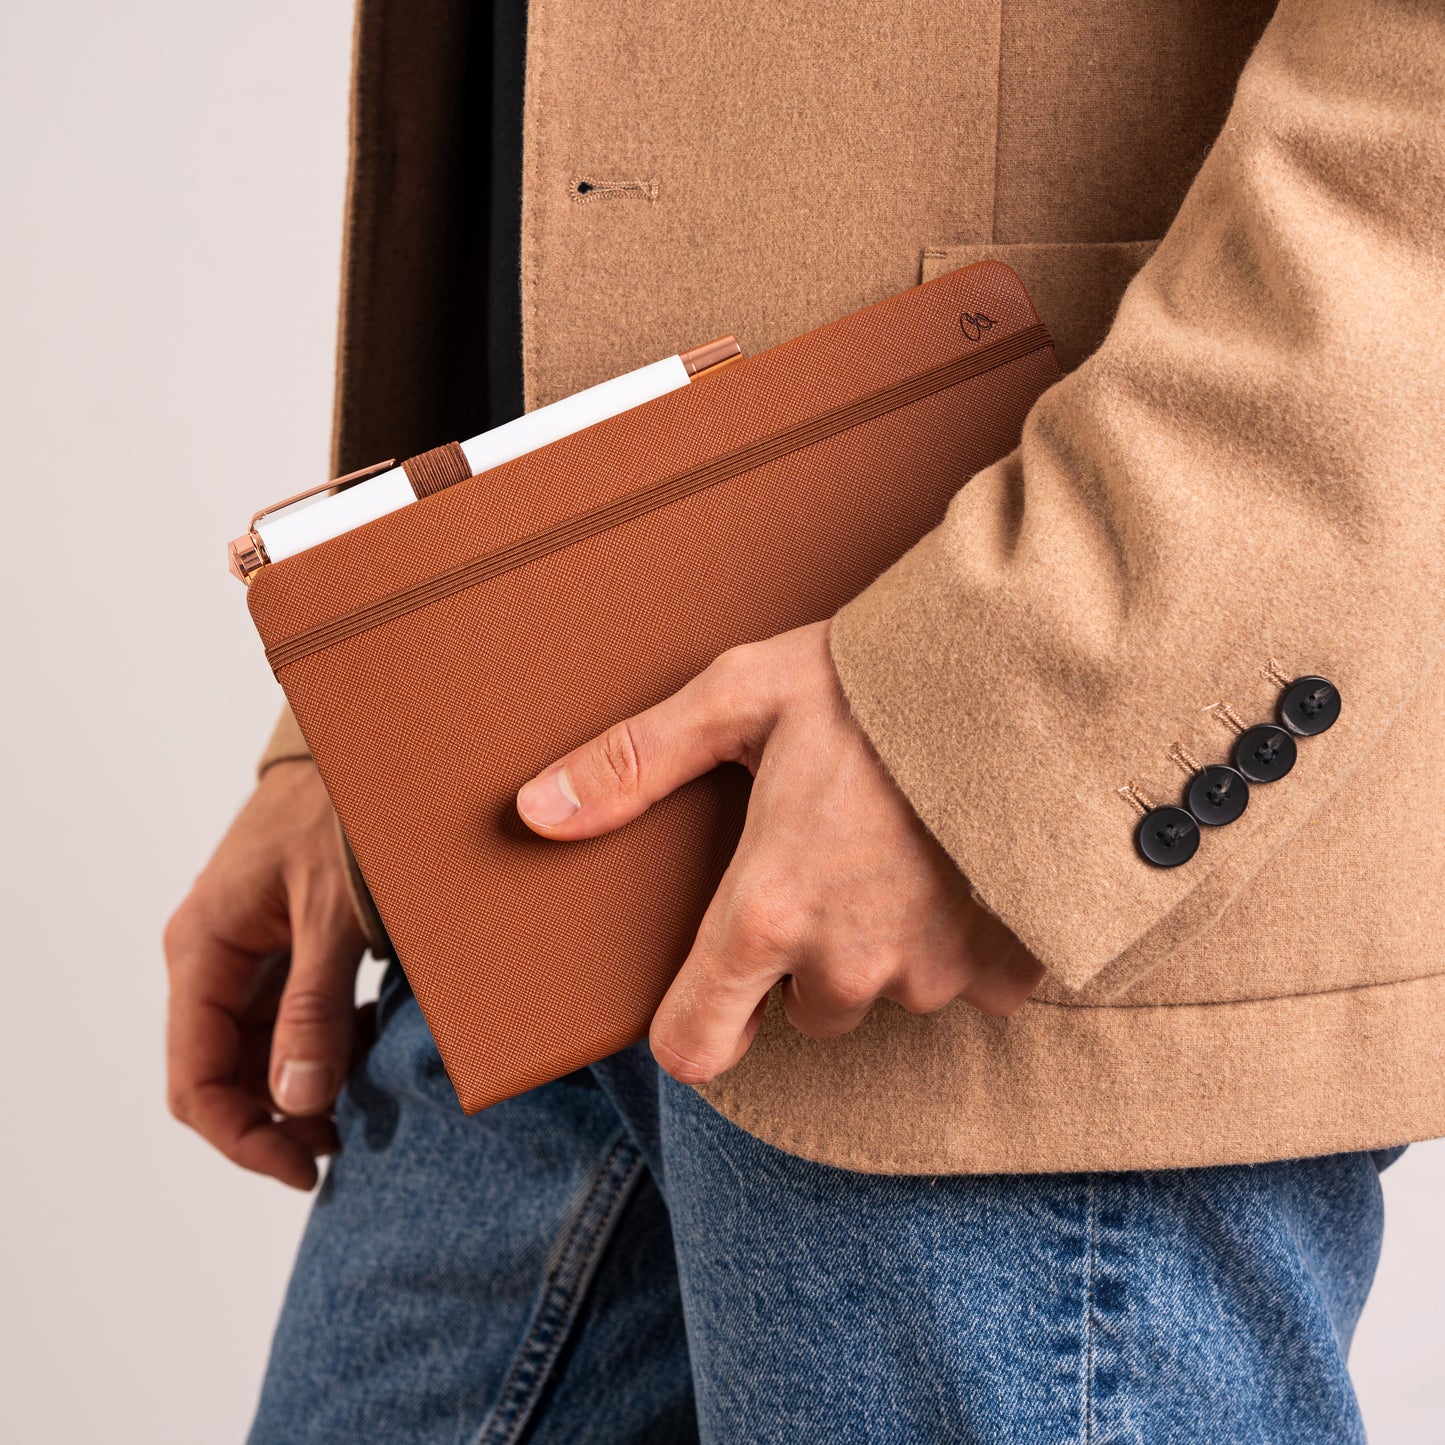 Brown Journal - PU Saffiano Leather